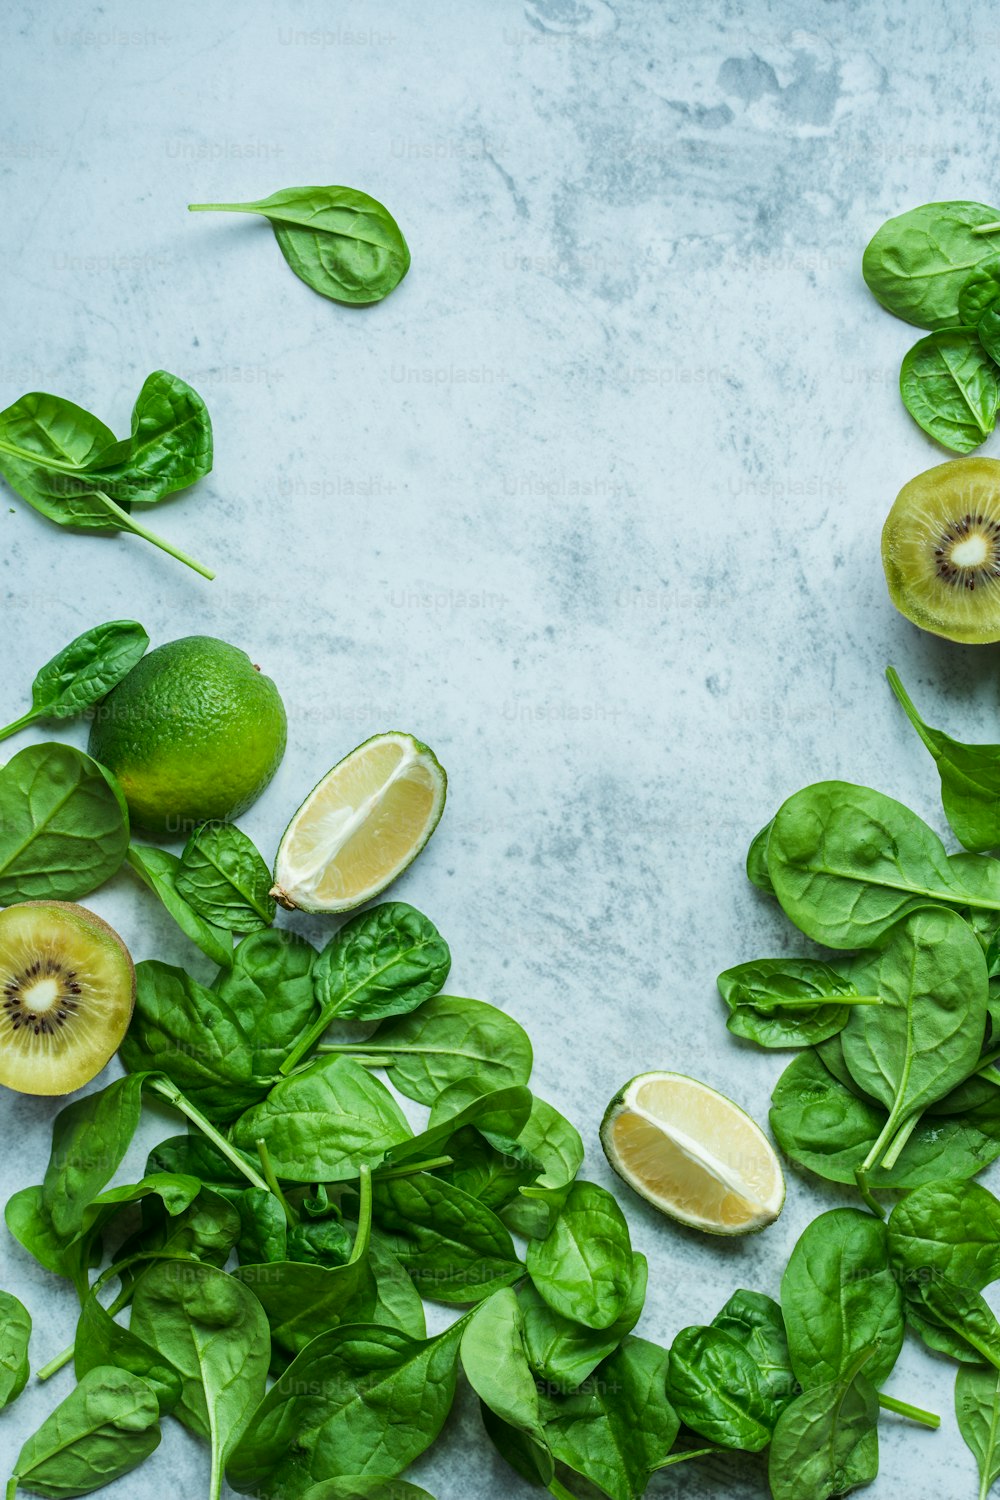 spinach leaves, lemons, and kiwis on a table